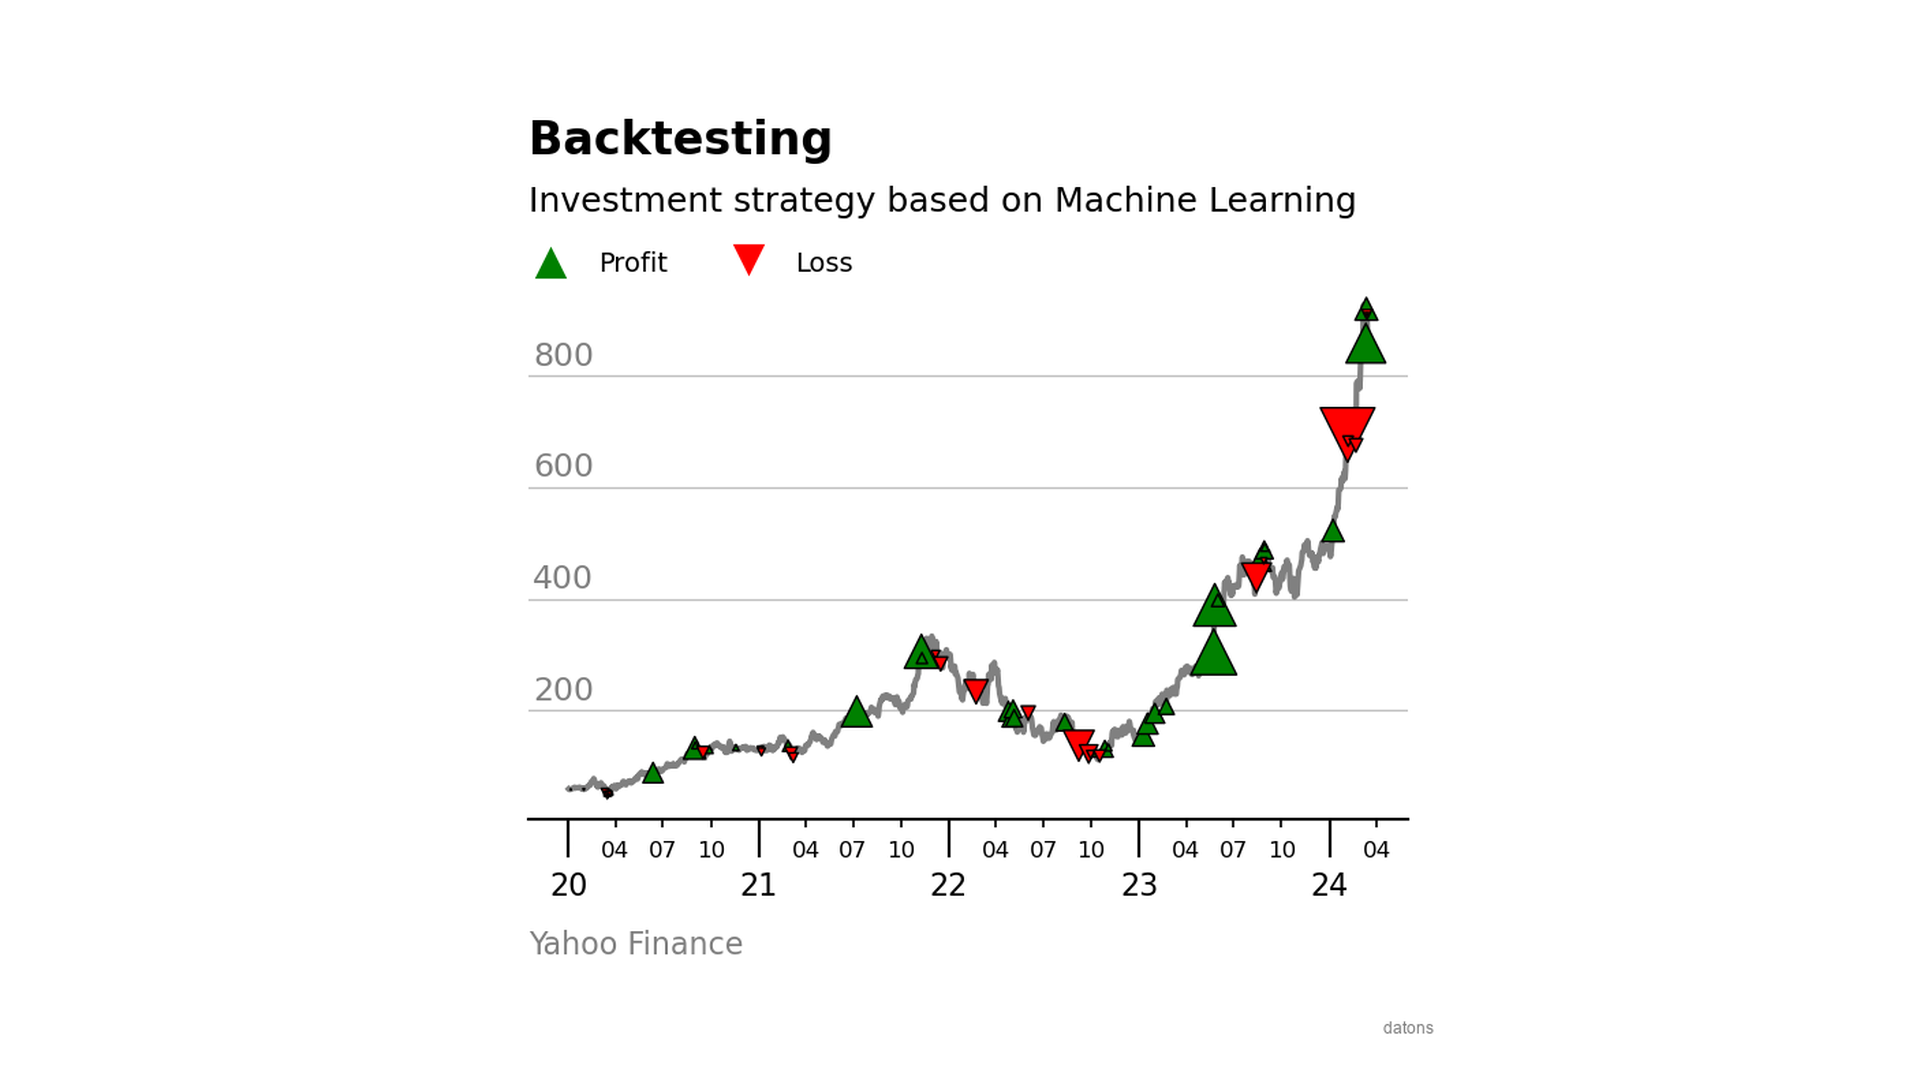 Backtesting with ML-based investment strategies